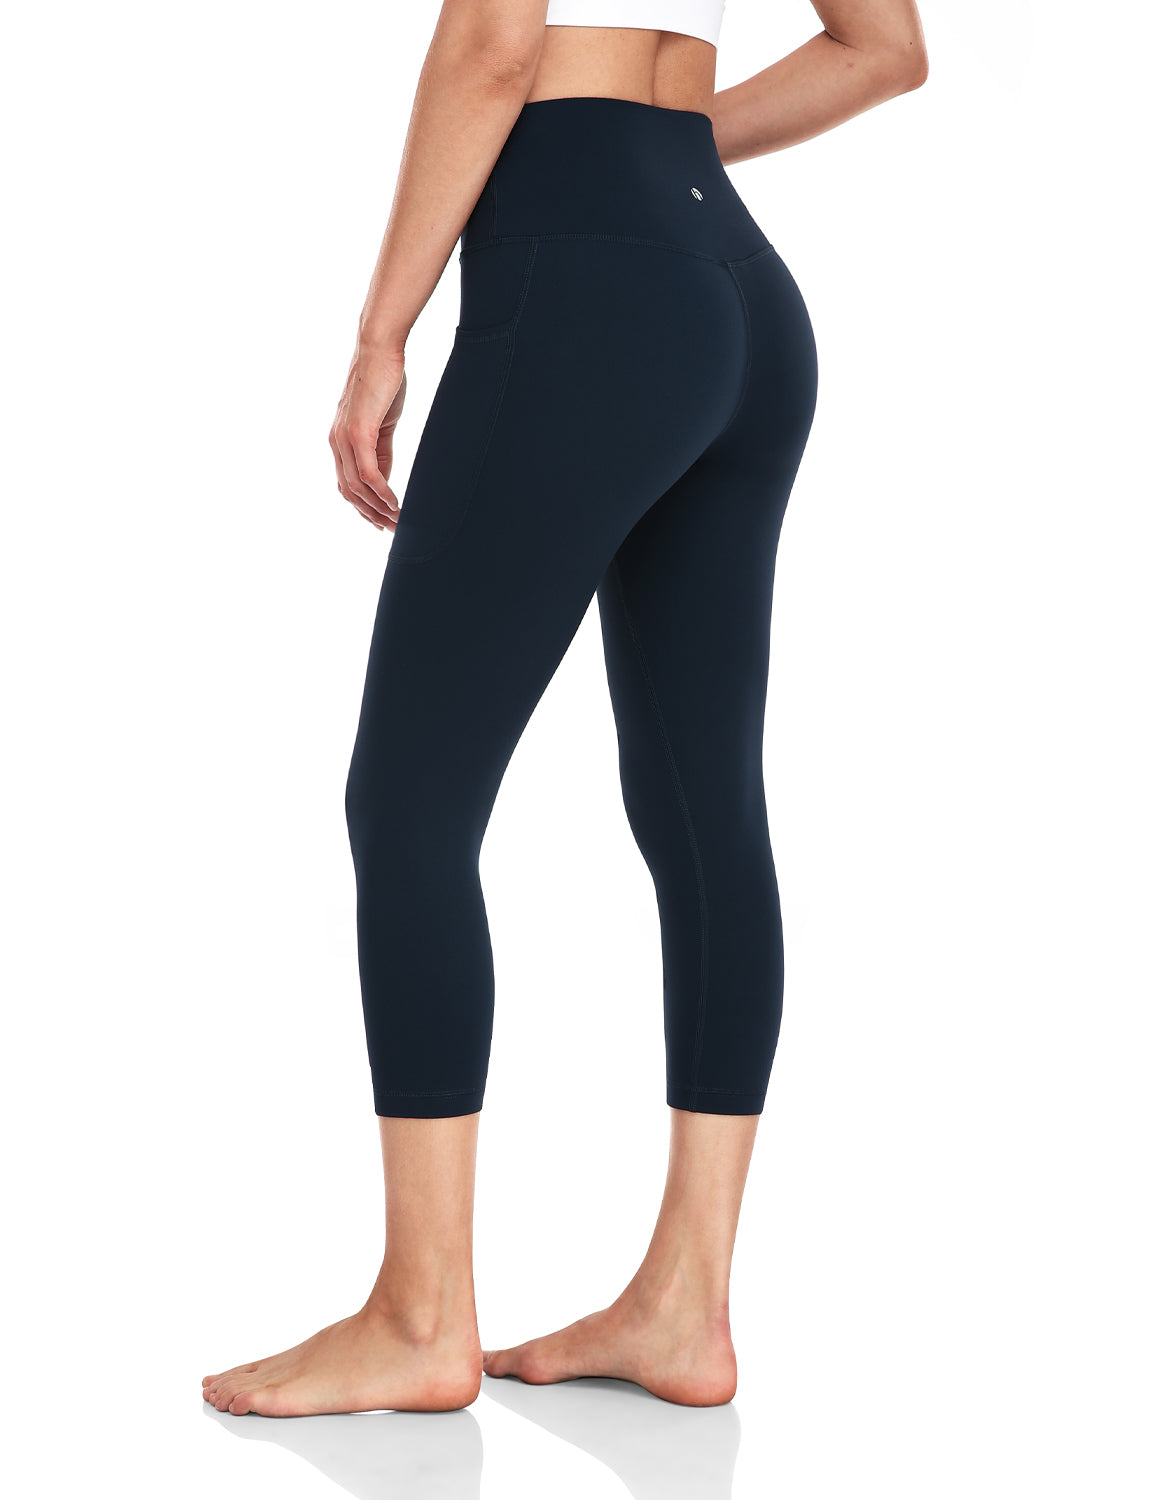 21 FeatherFit™ Capris Yoga Leggings Buttery Soft Non See-Through Tummy  Control Gym Tights With Hidden Pocket at Waist